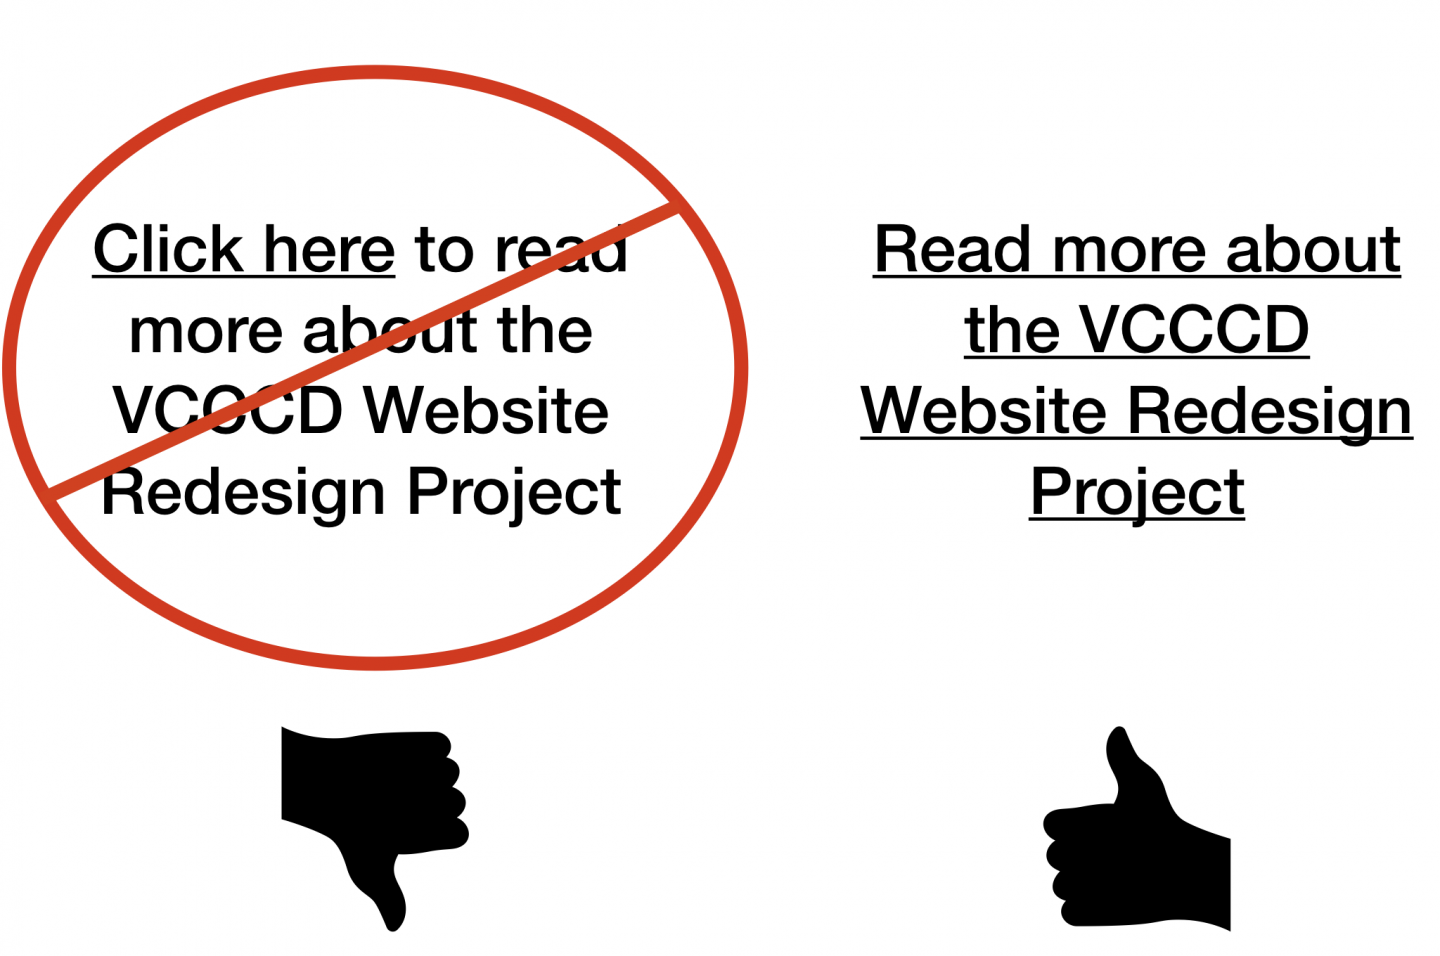 Thumbs down for "click here" hyperlinks and a thumbs up for descriptive hyperlink with text that reads, Read more about the VCCCD Website Redesign Project